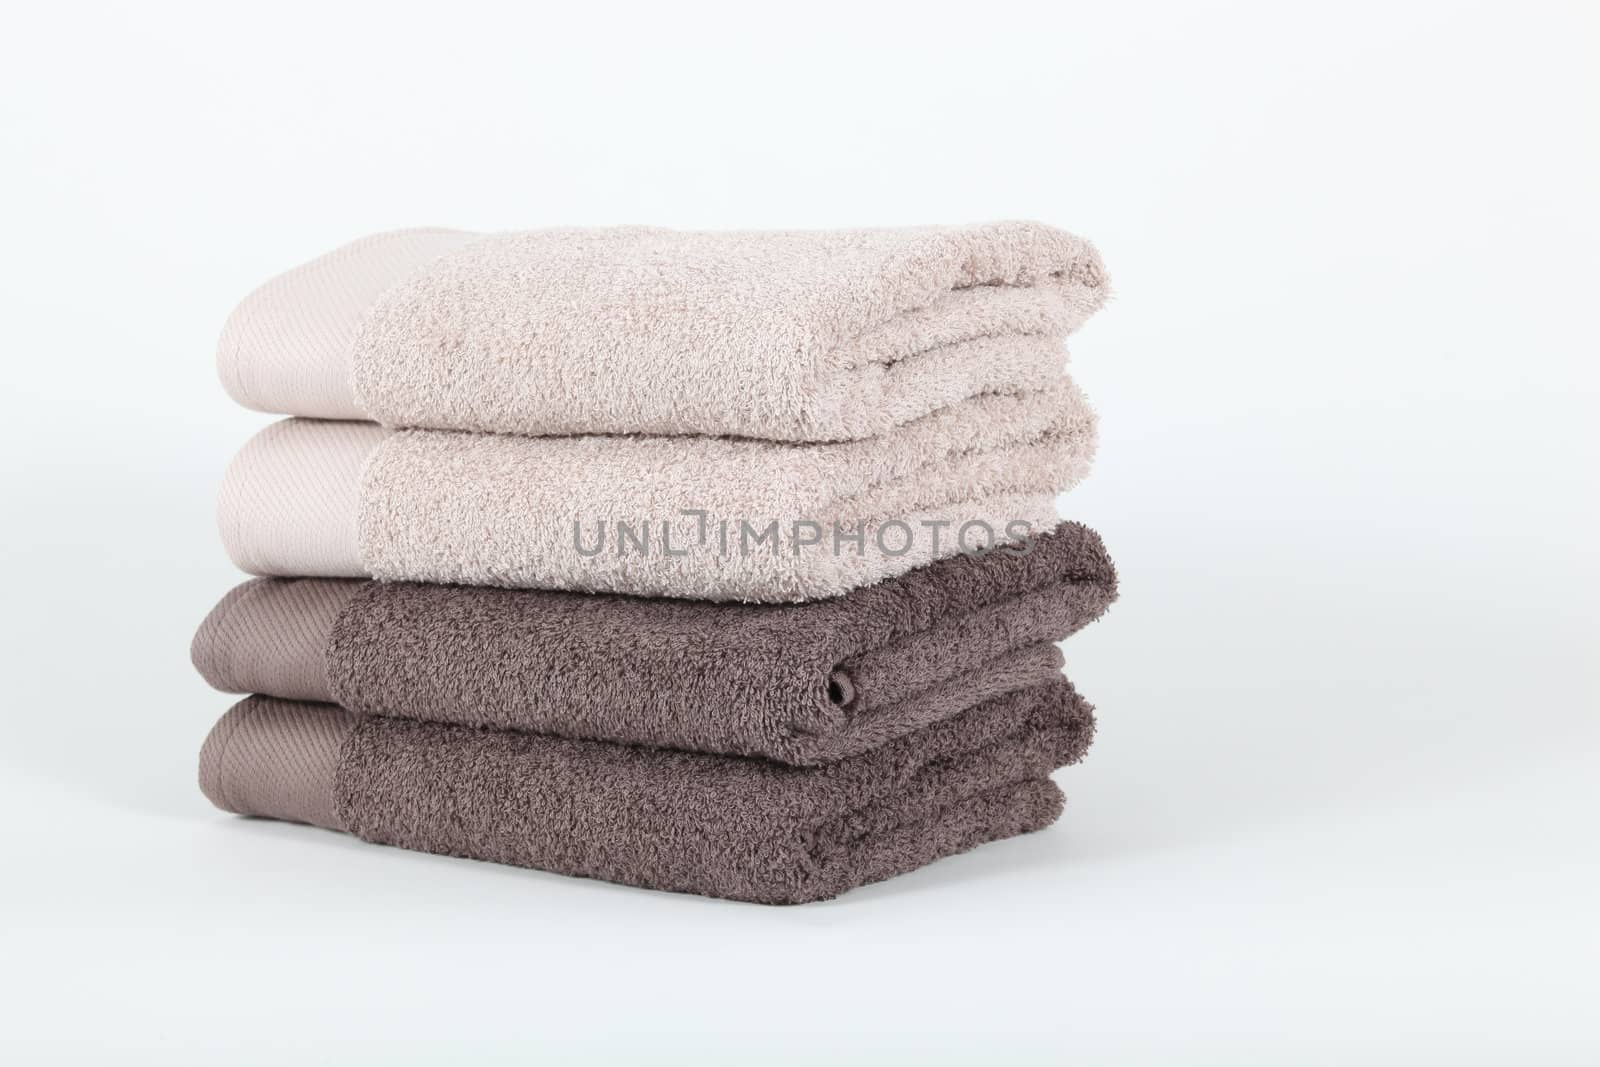 Neatly folded towels by phovoir